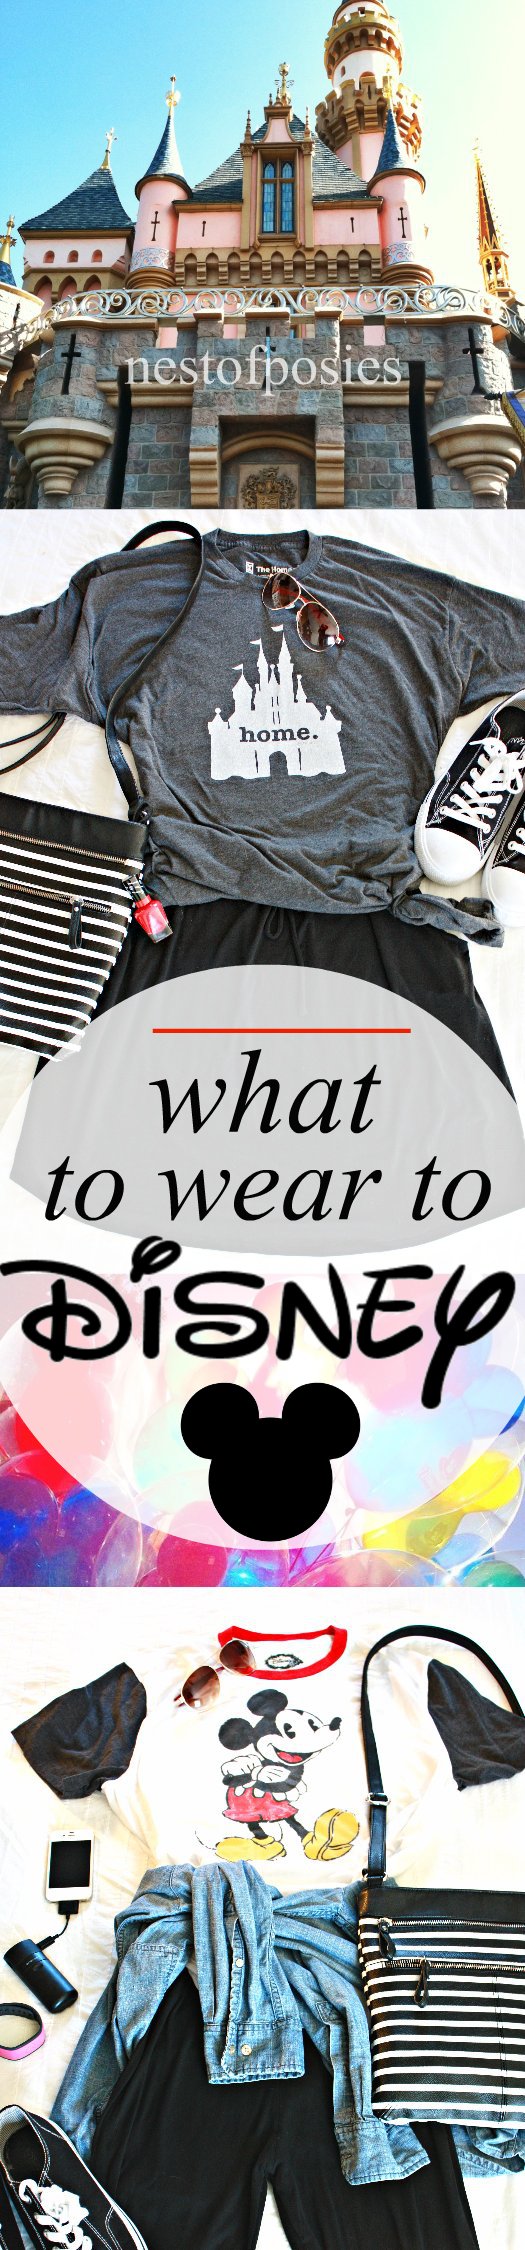 What to Wear to Disney